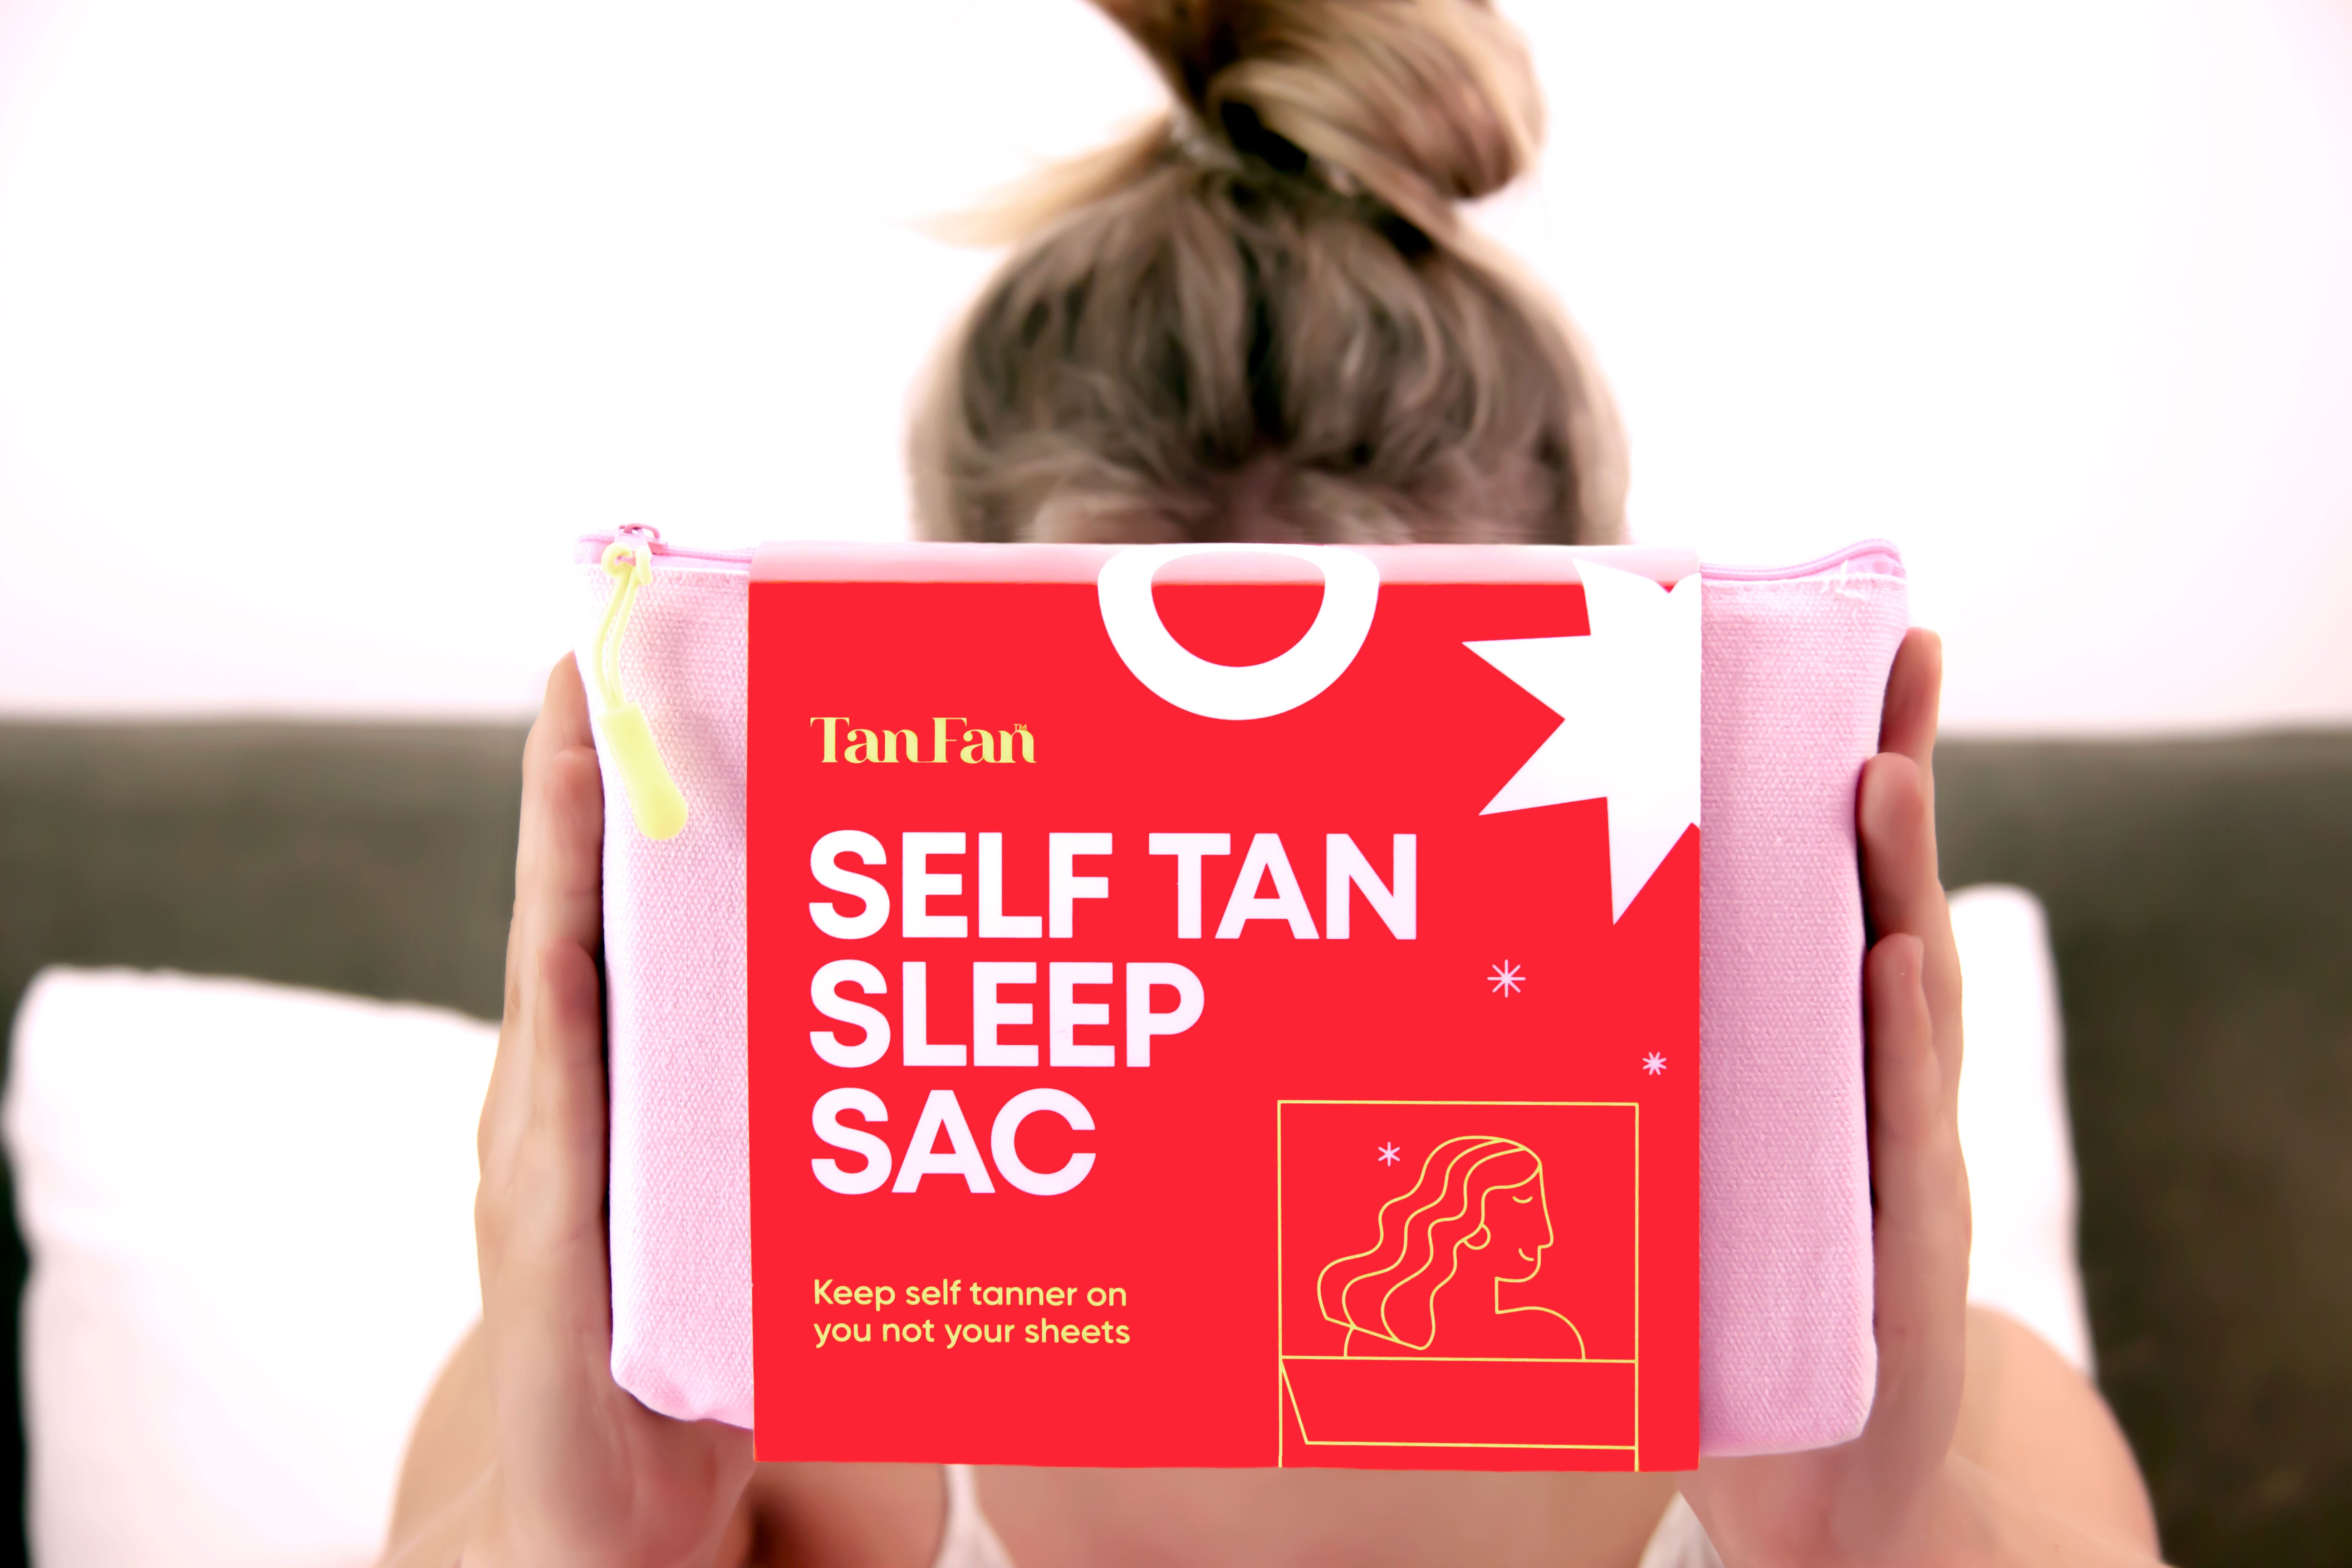 The Tan Fan Sleep Sac Is The Secret For Clean Sheets While Self-Tanning For Over Ten Million Girls